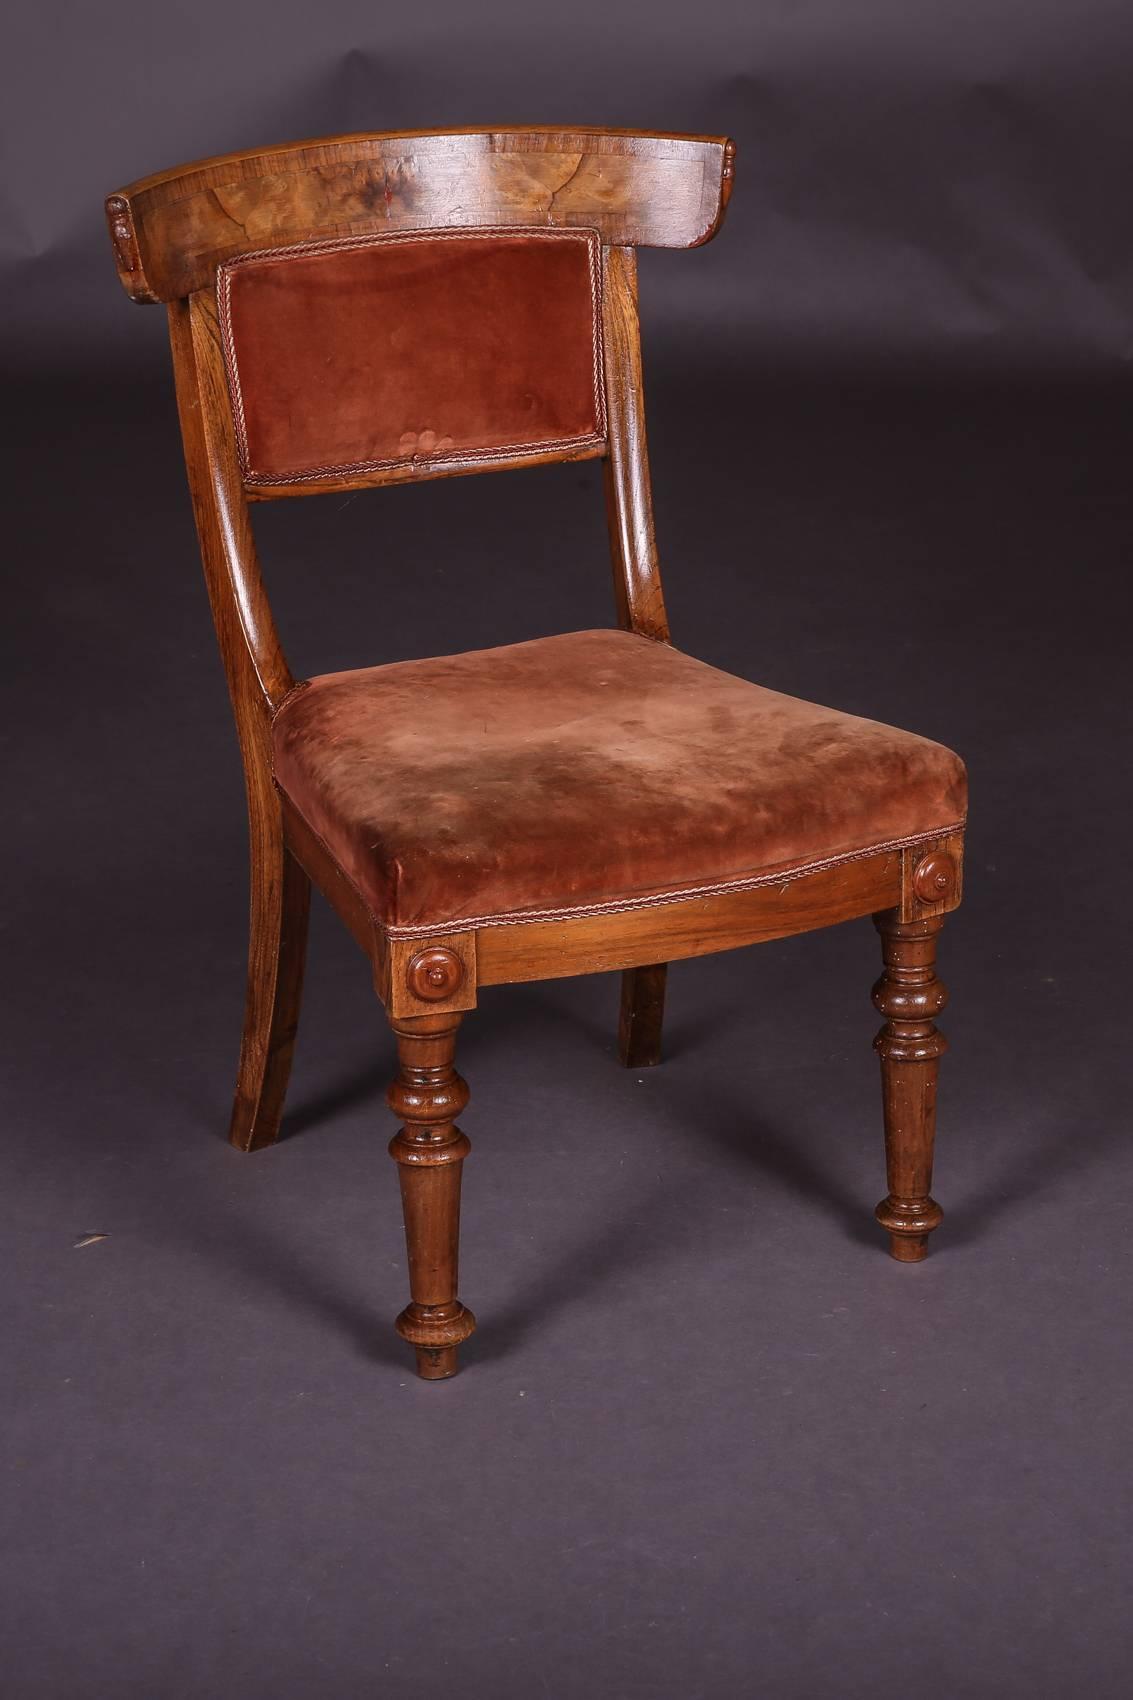 Biedermeier chair, circa 1845.
Solidwood with red cover. Rear legs saber-shaped. Wide curving backrest.

(C-127).